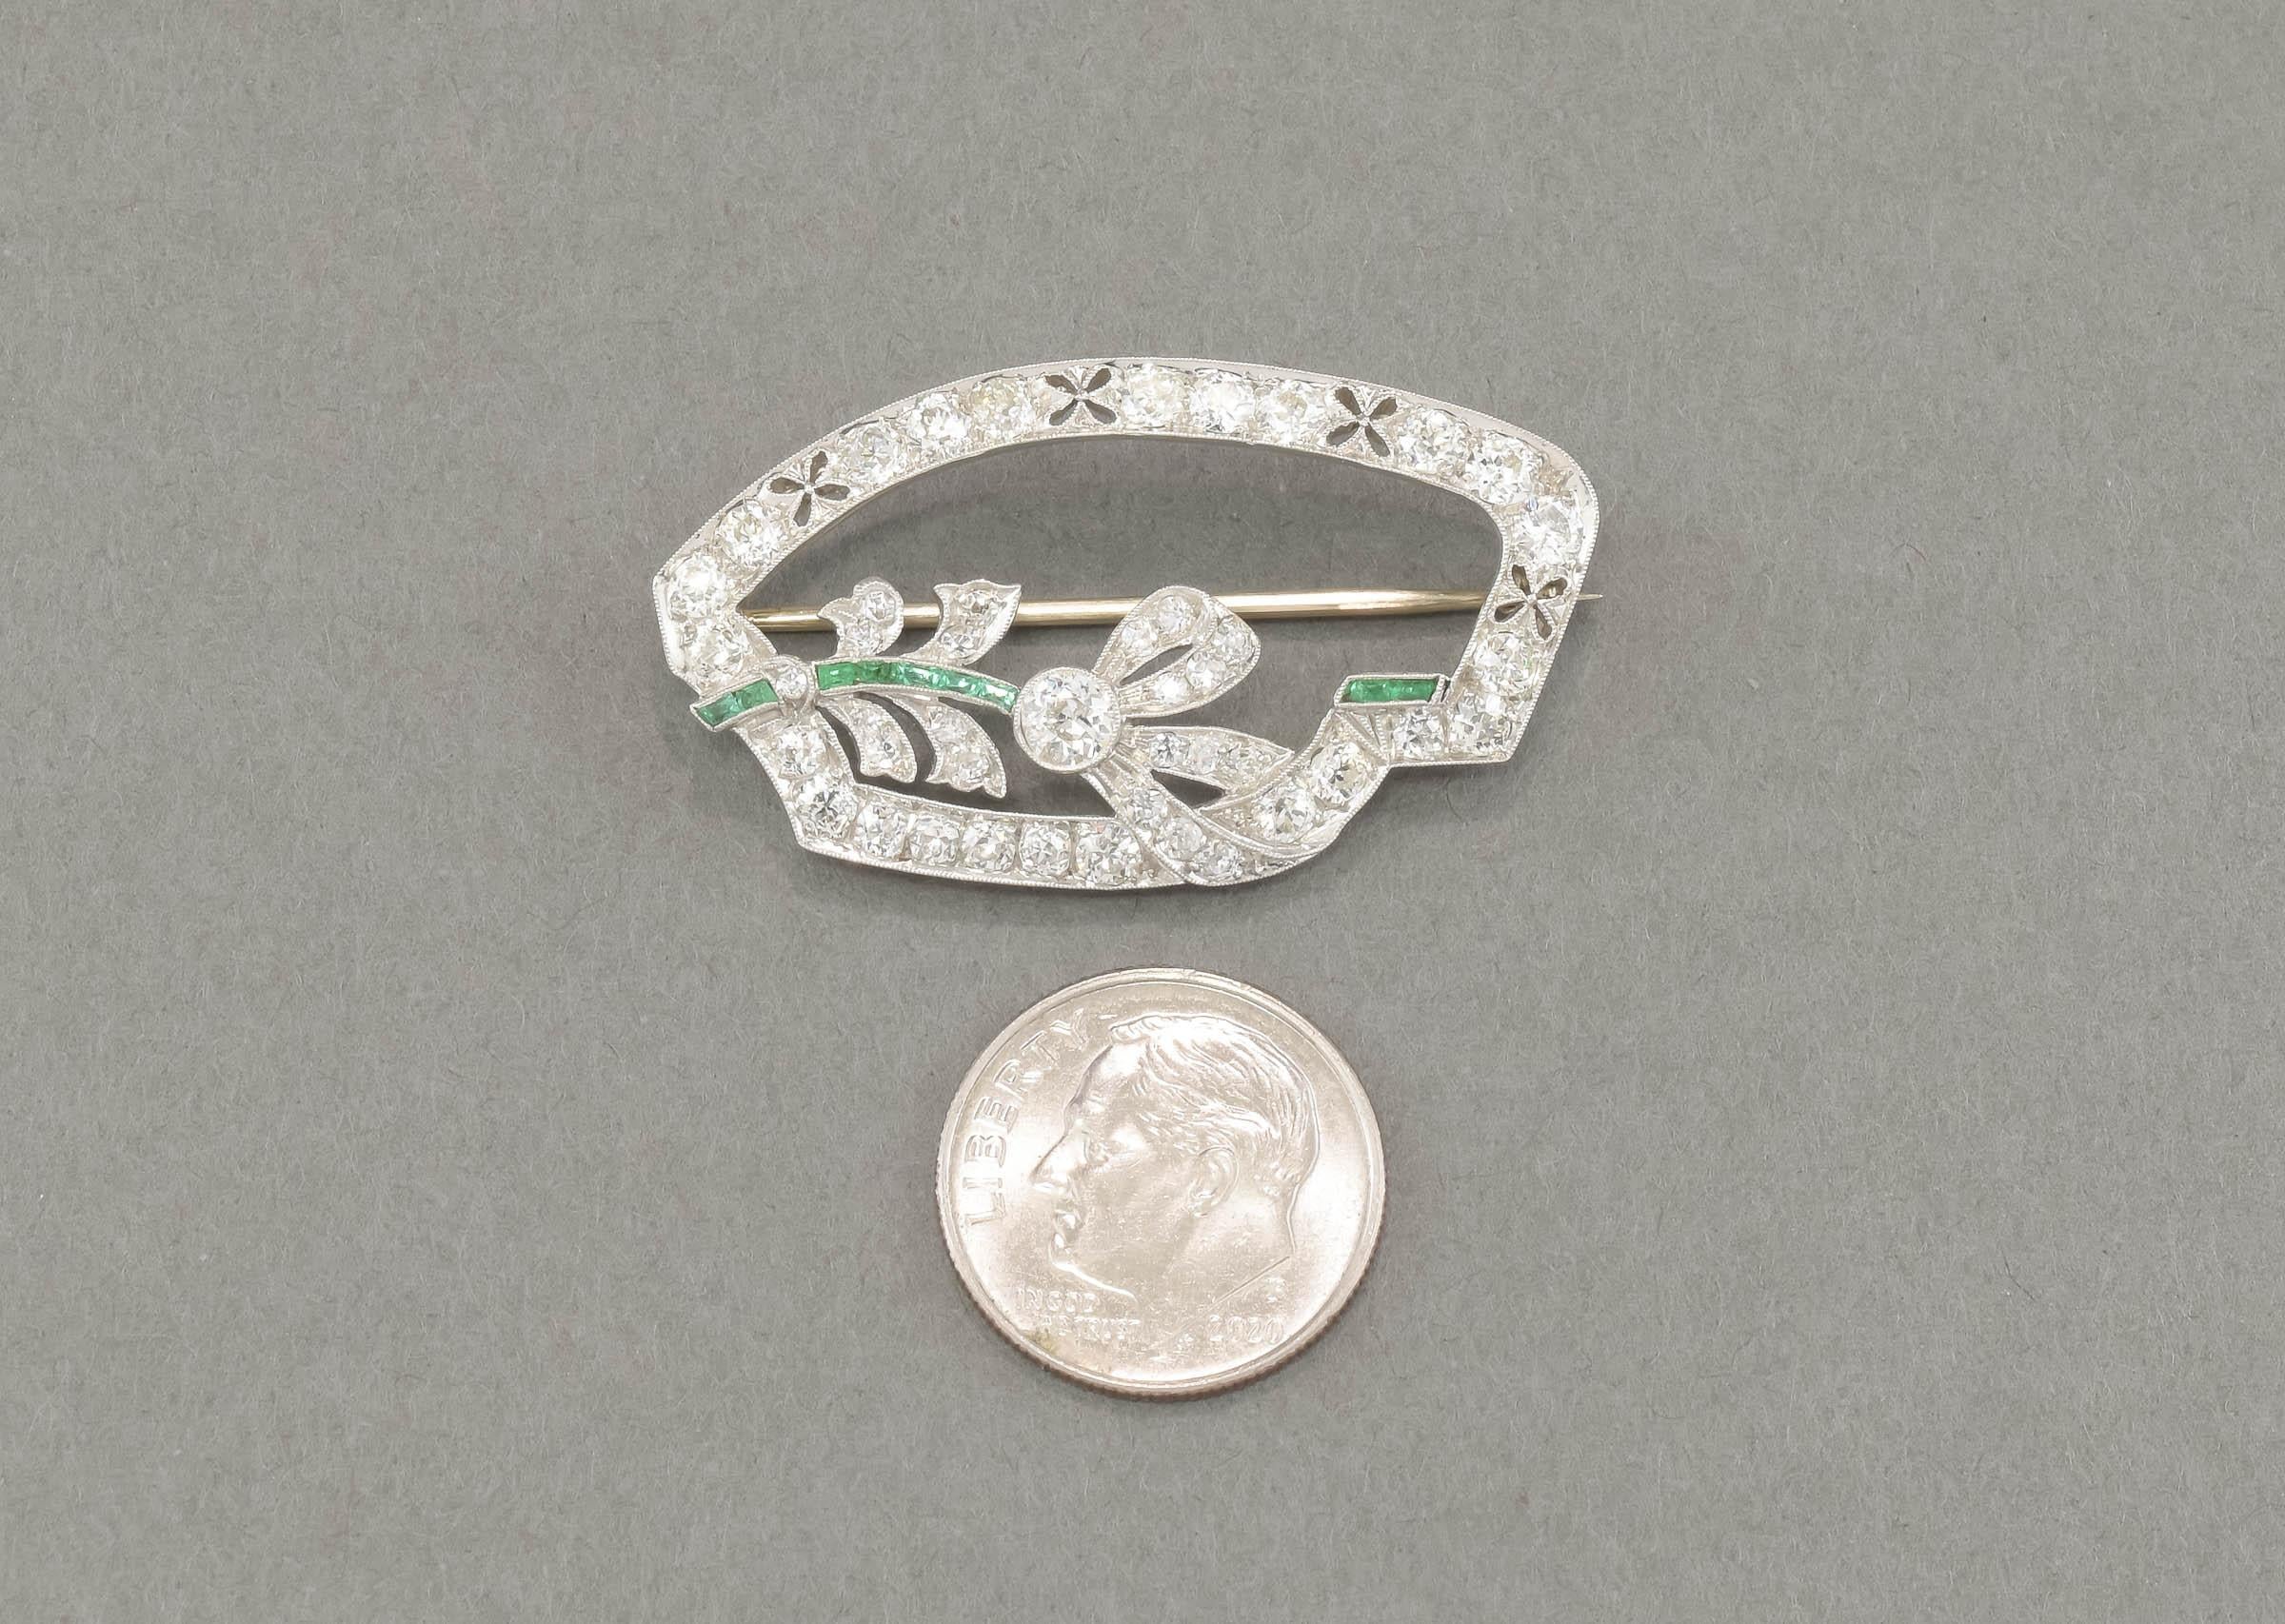 So elegant, this incredibly fiery old cut diamond and emerald brooch dates to the late 20’s to 1930’s Art Deco period  Fabulous as a brooch, it would also be wonderful converted into a necklace.

Crafted of platinum with a 14K white gold pin stem &